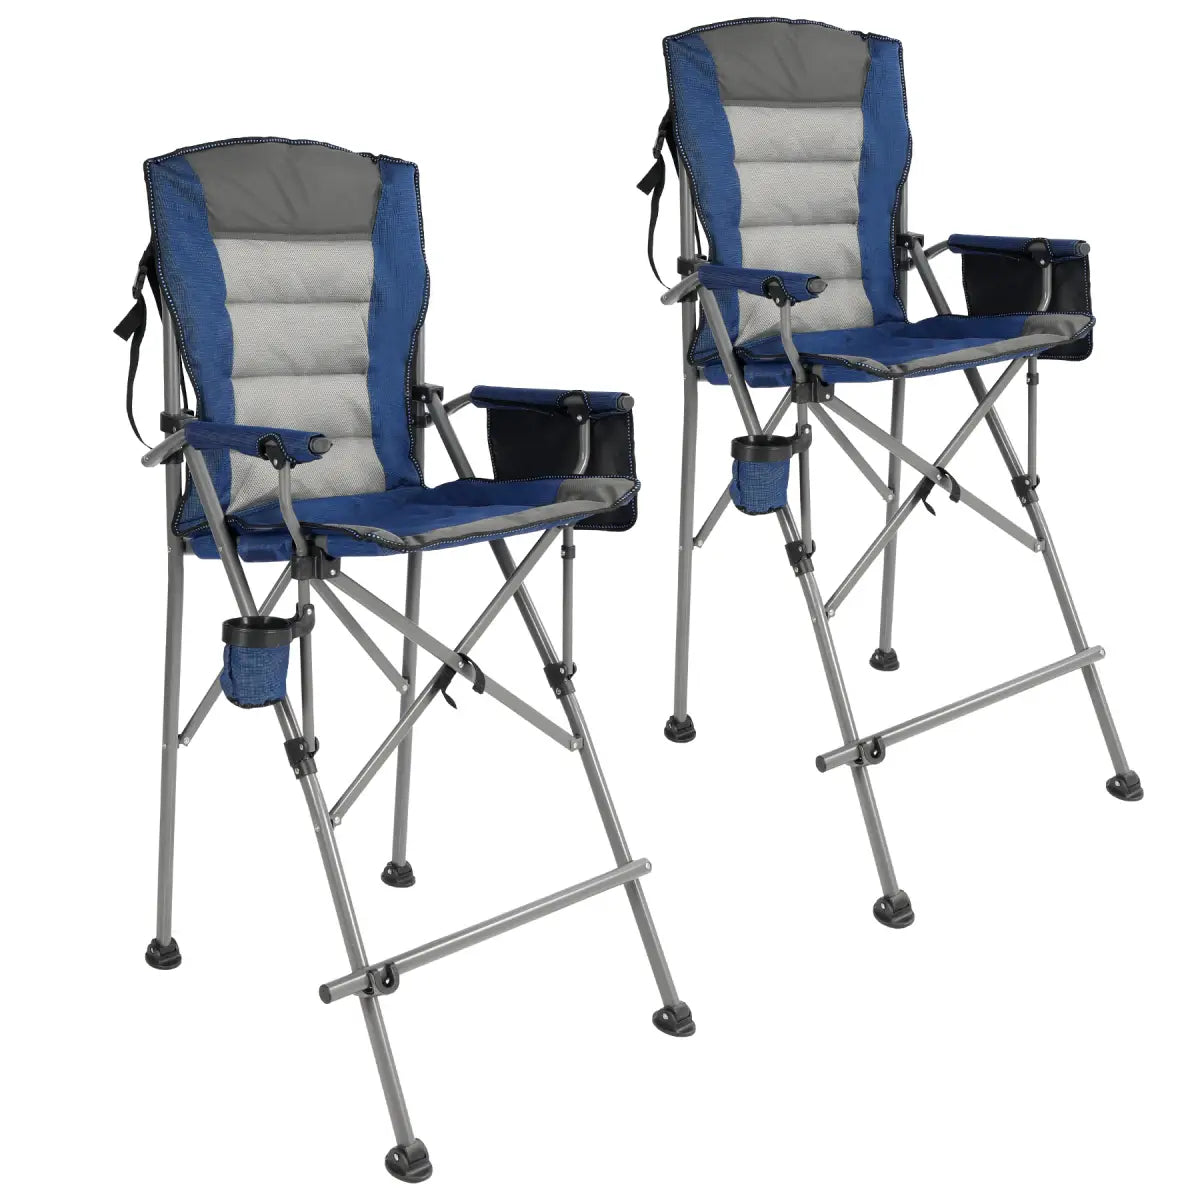 Bar Height Extra Tall Folding Chairs with High Back Padded Seat and Arms